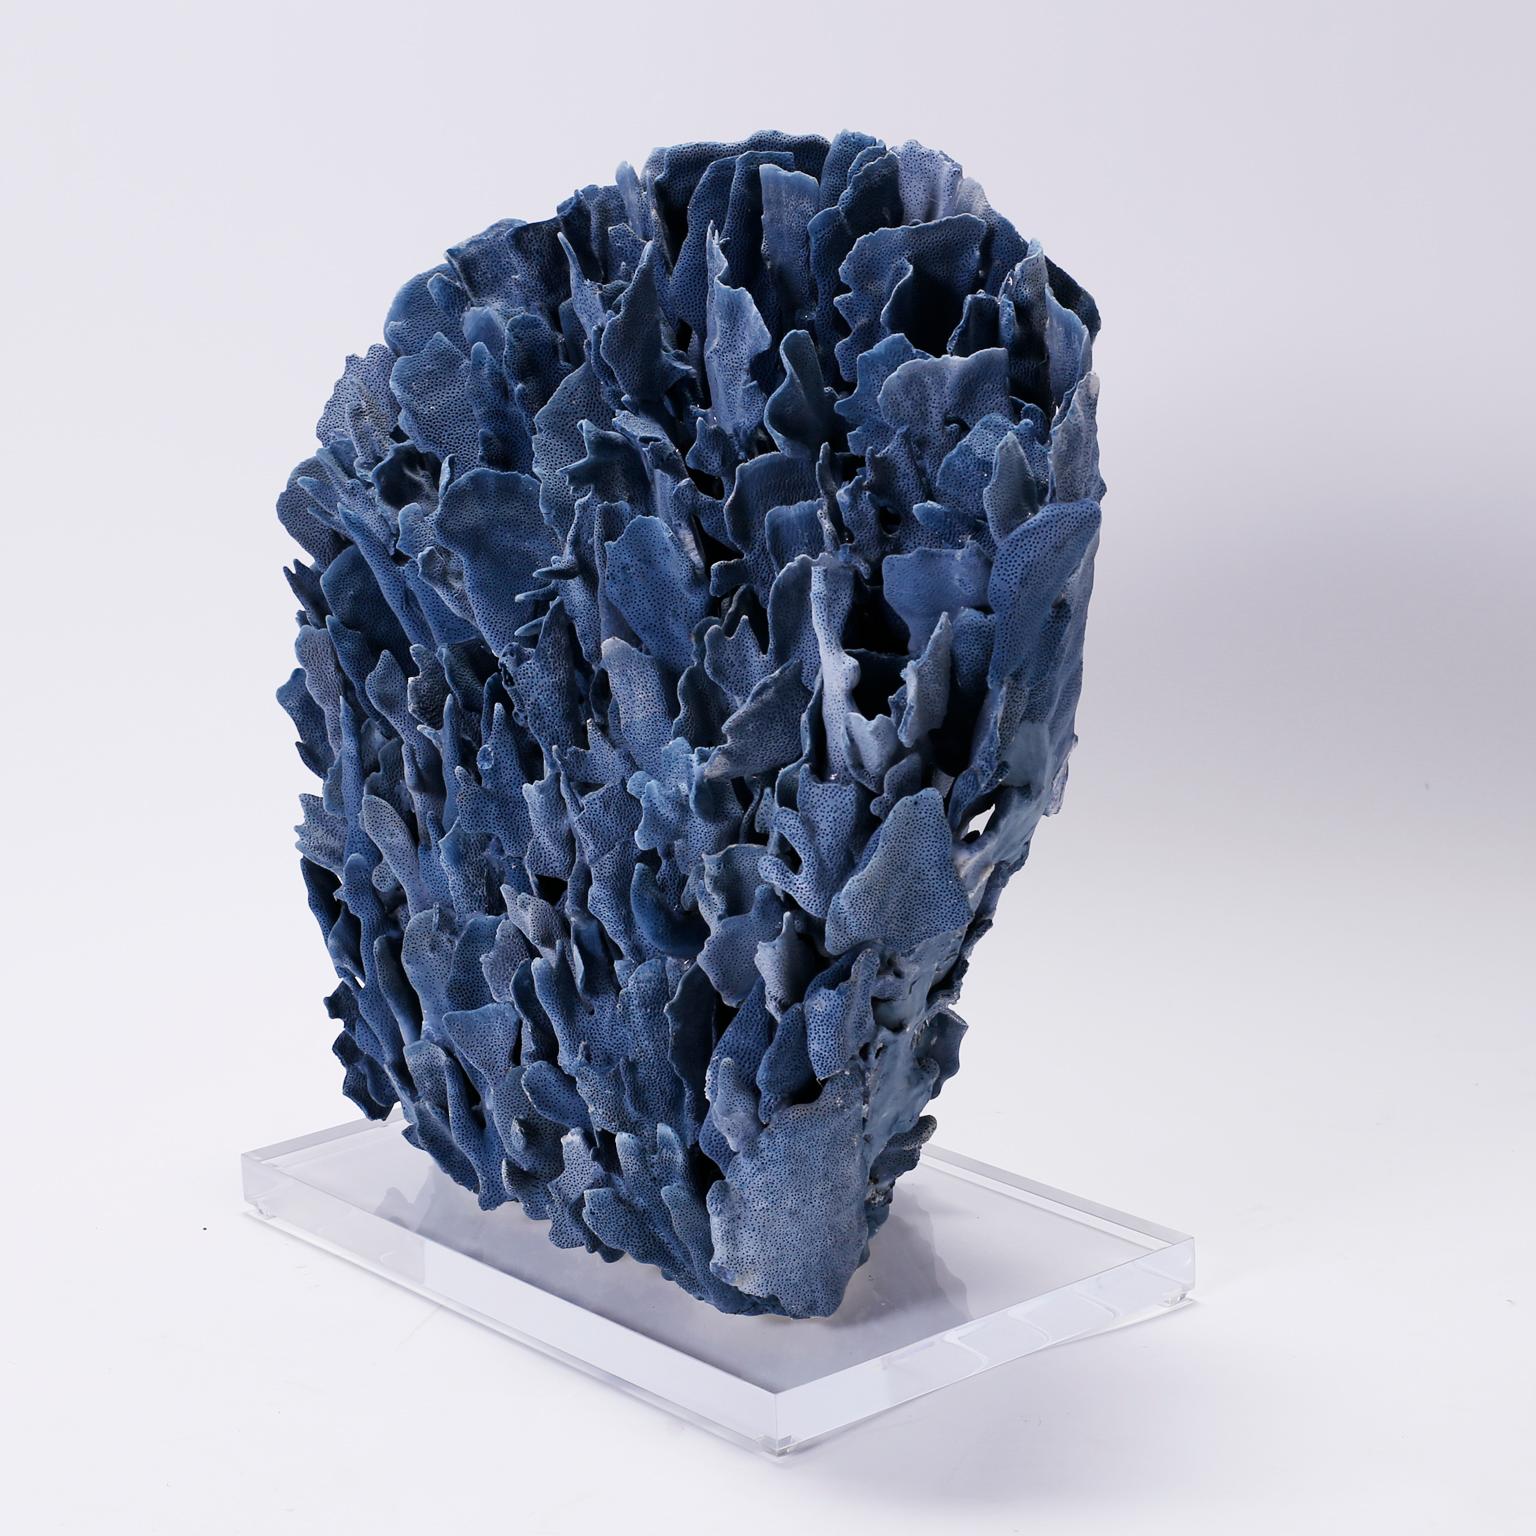 Large and impressive rare dark blue coral sculpture or assemblage designed and expertly crafted by F. S. Henemader with authentic coral and alluring color and sea inspired texture. Presented on a lucite base to enhance its sculptural elements. Coral